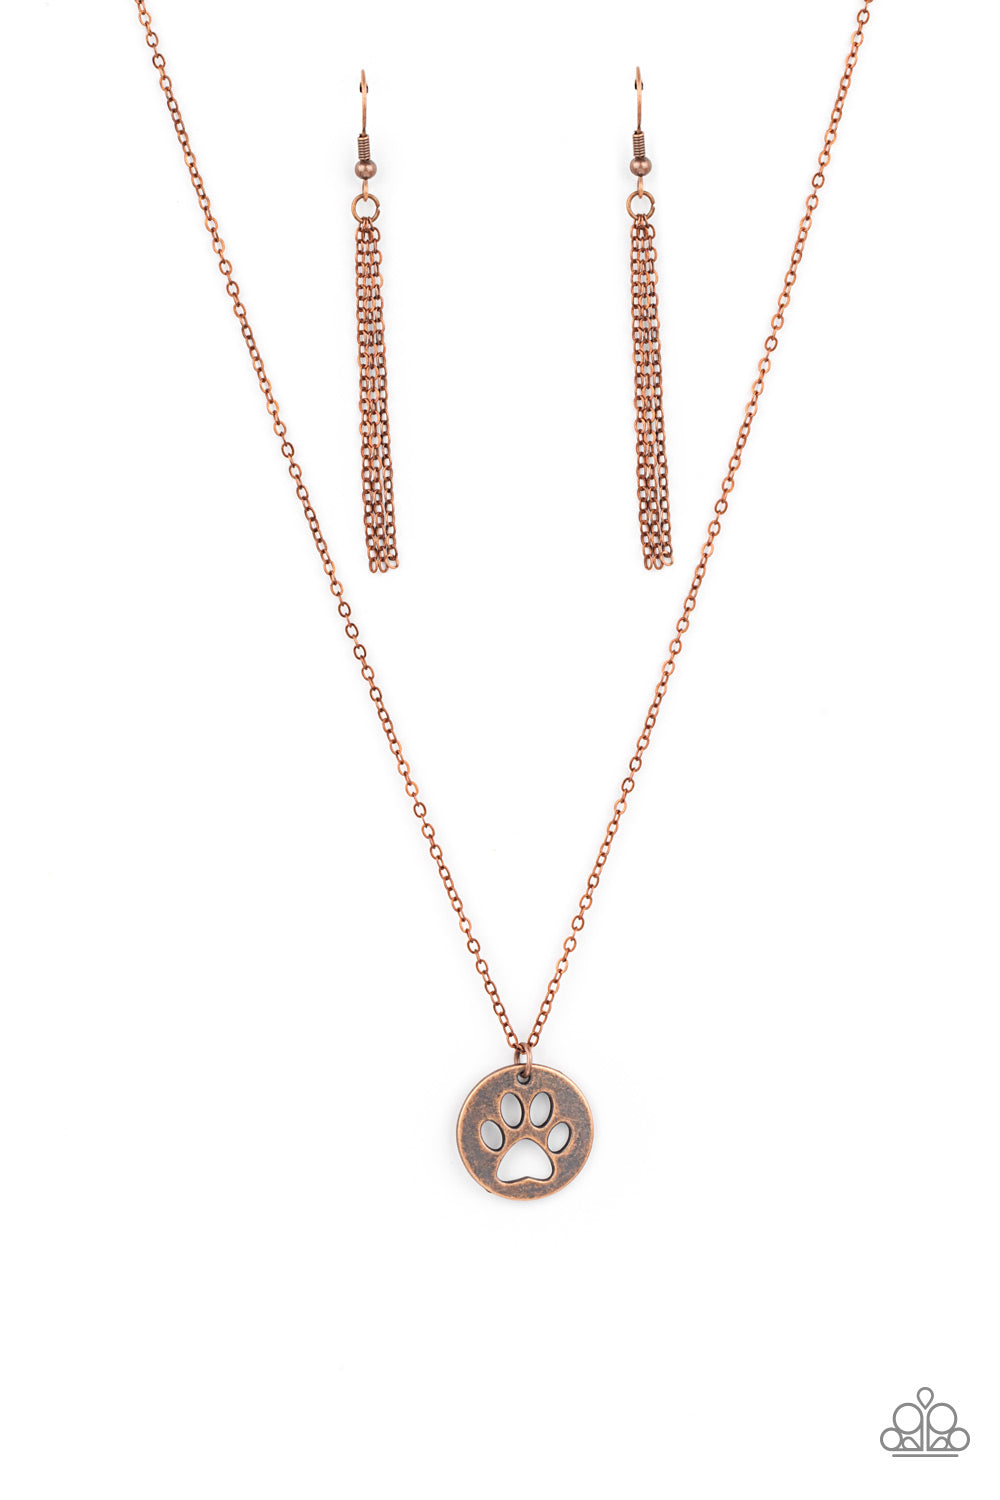 Think PAW-sitive - copper - Paparazzi necklace